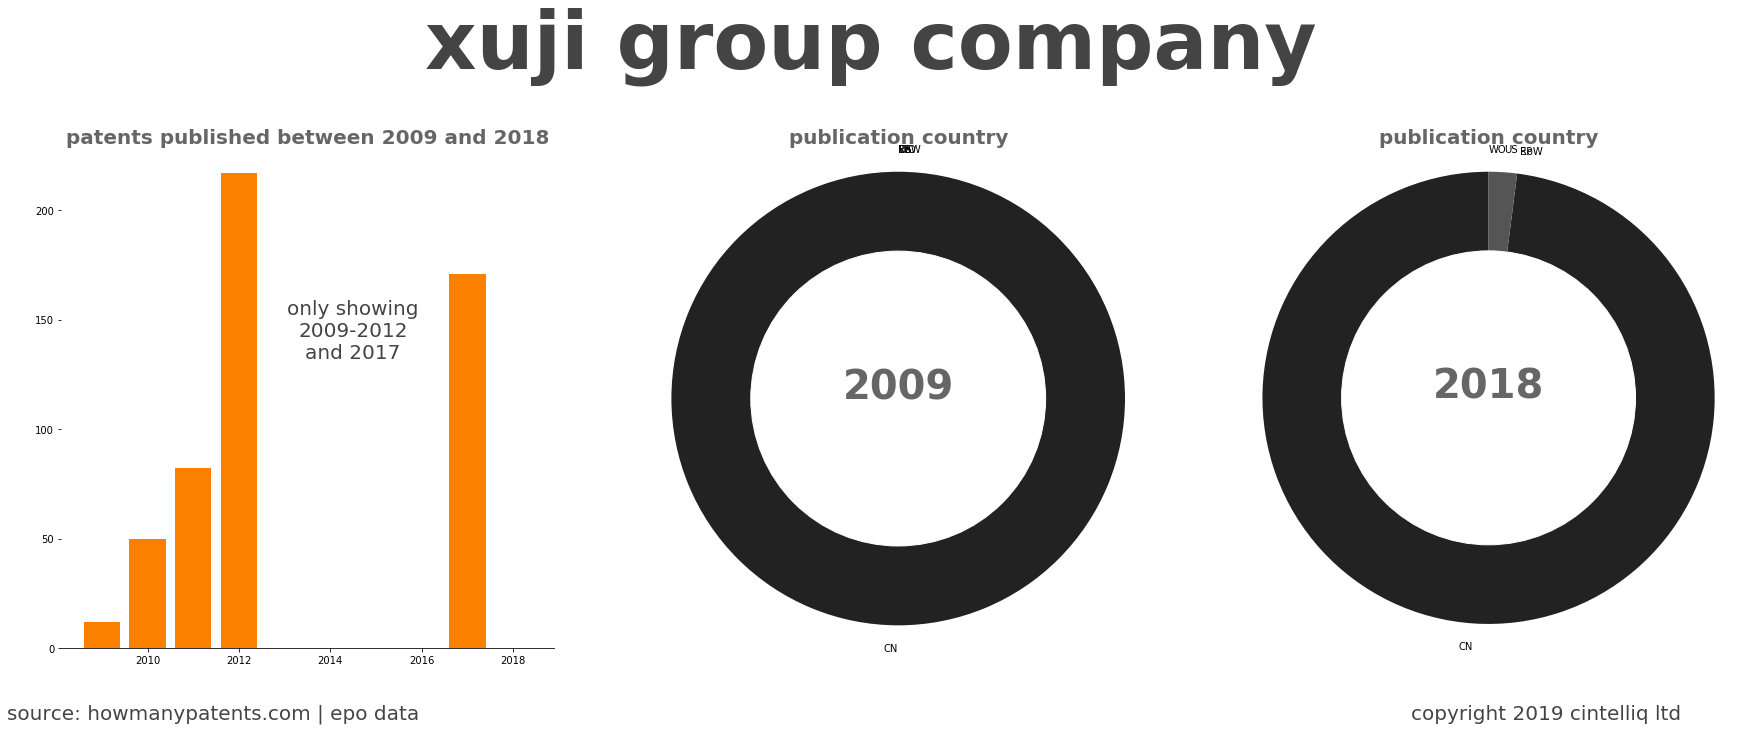 summary of patents for Xuji Group Company